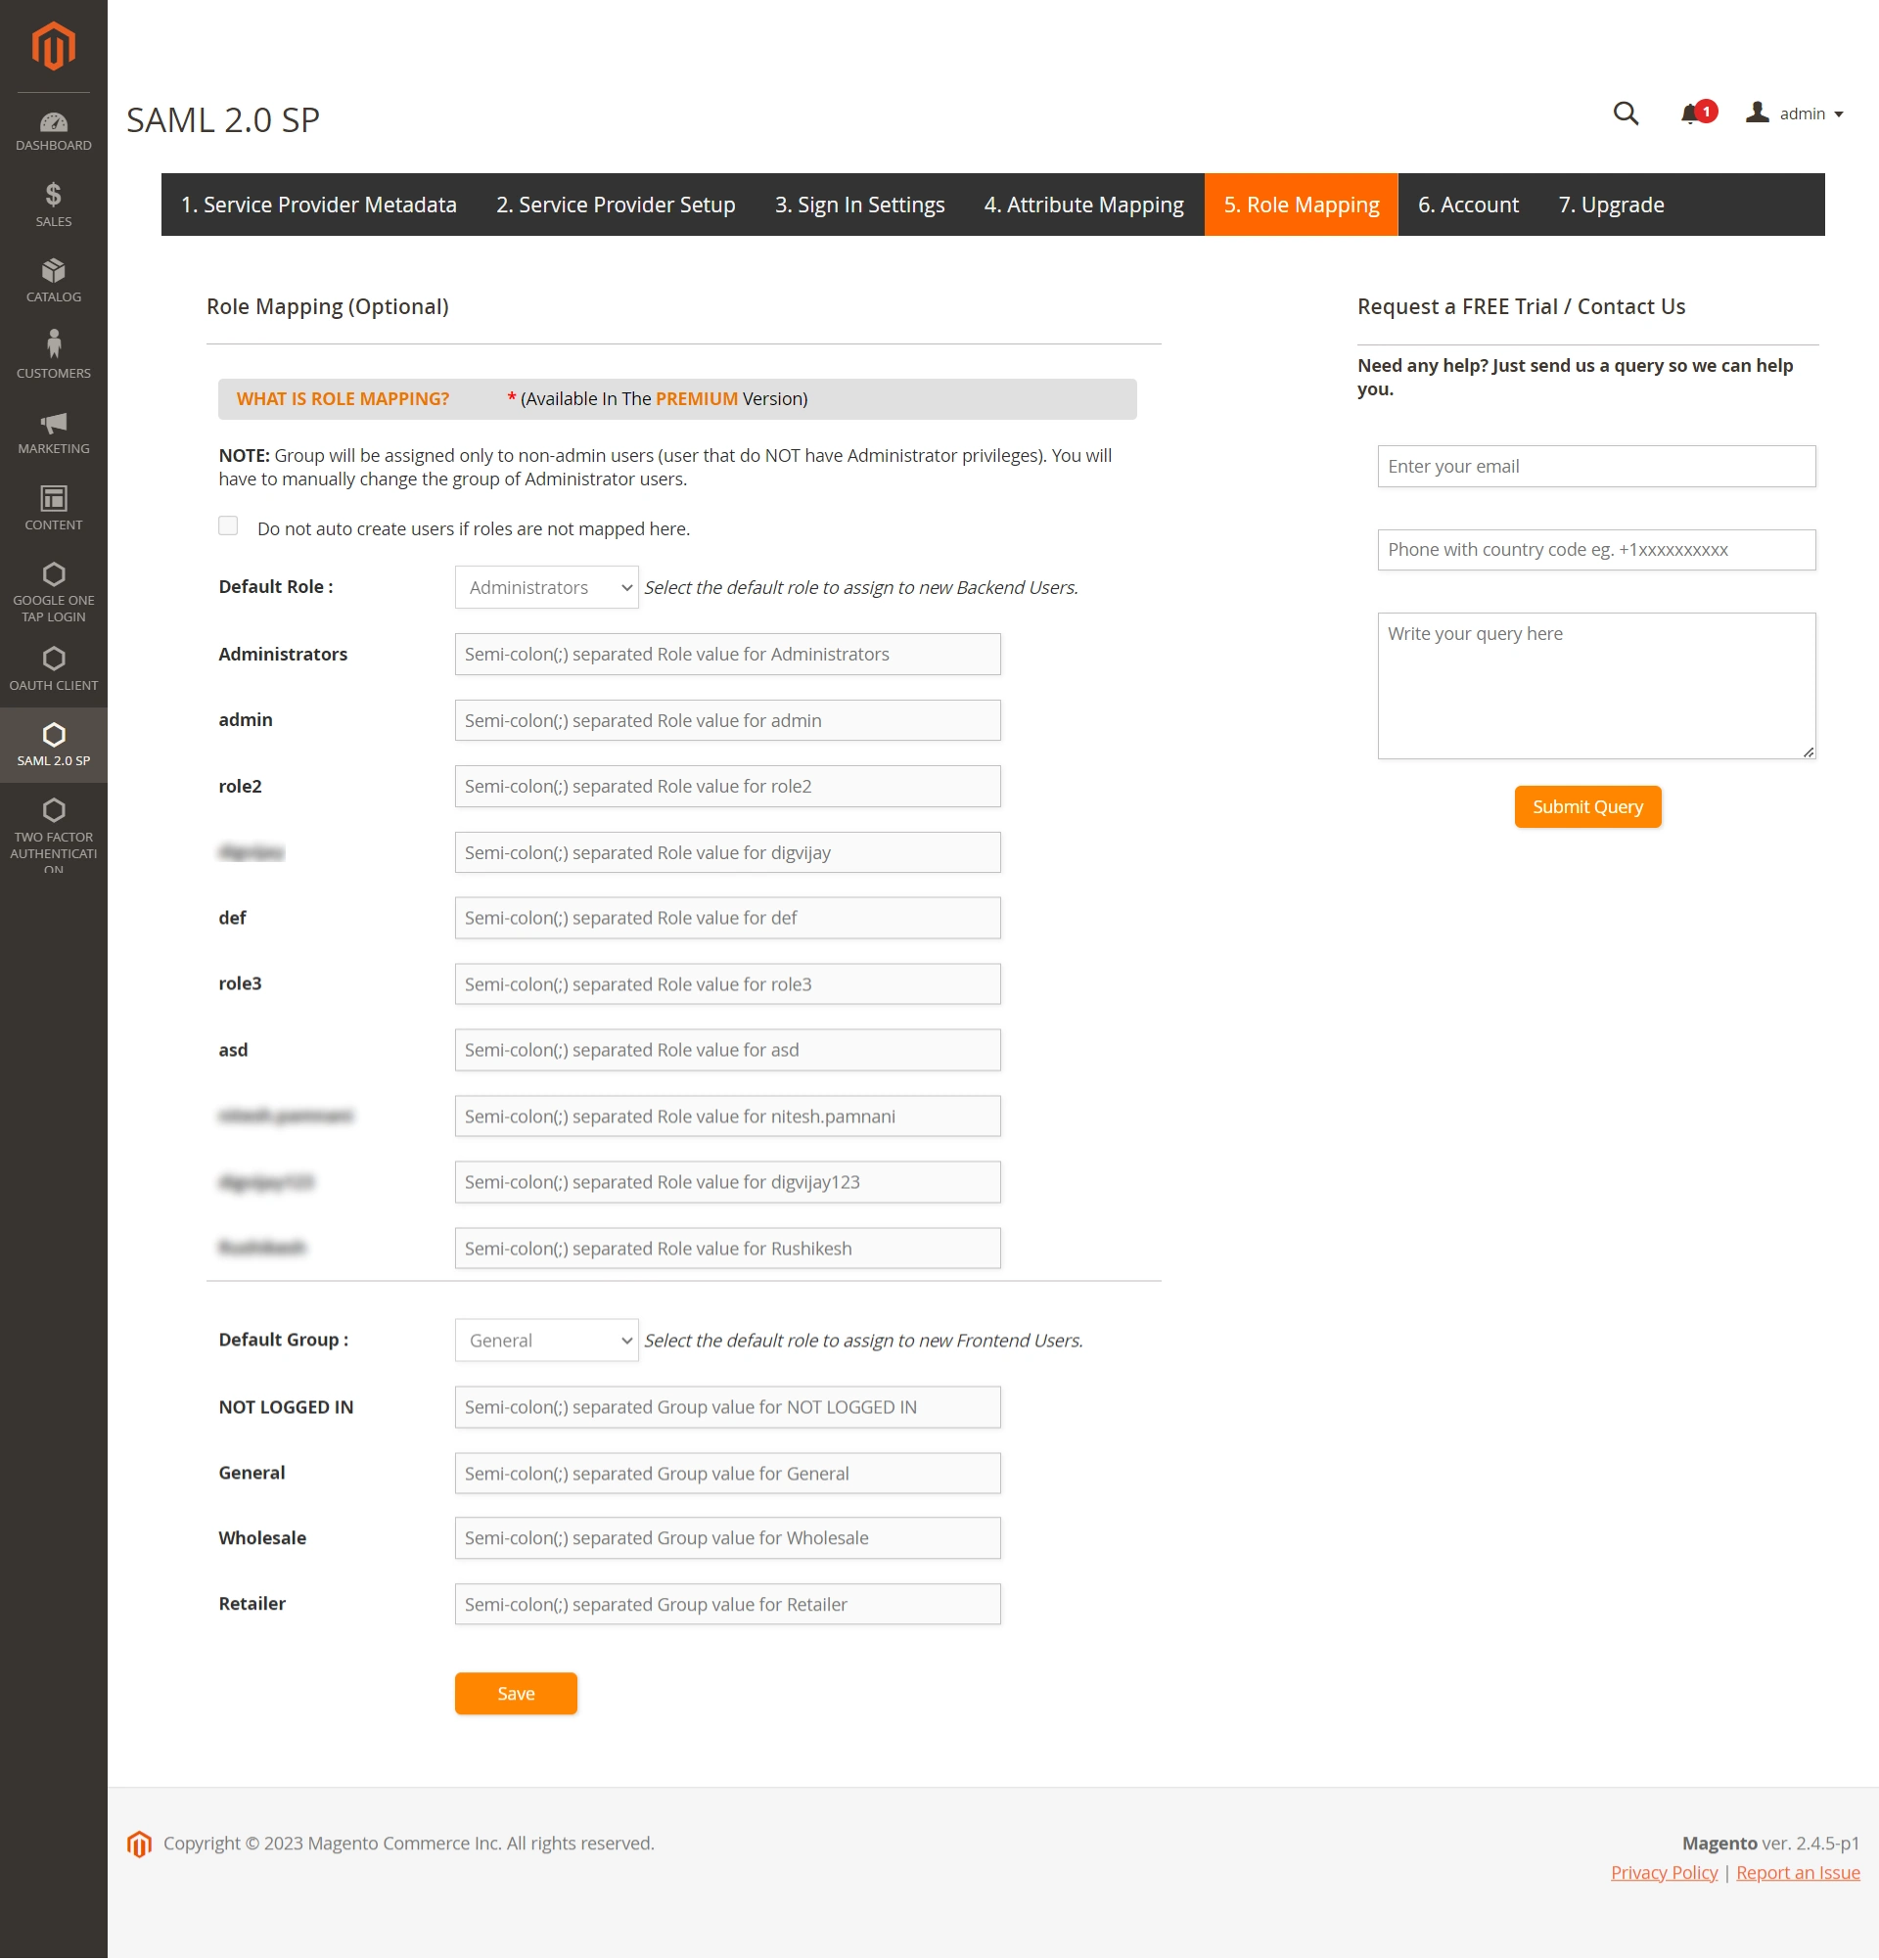 Azure AD Magento SSO - Azure Single Sign-On(SSO) Login in Magento - role mapping